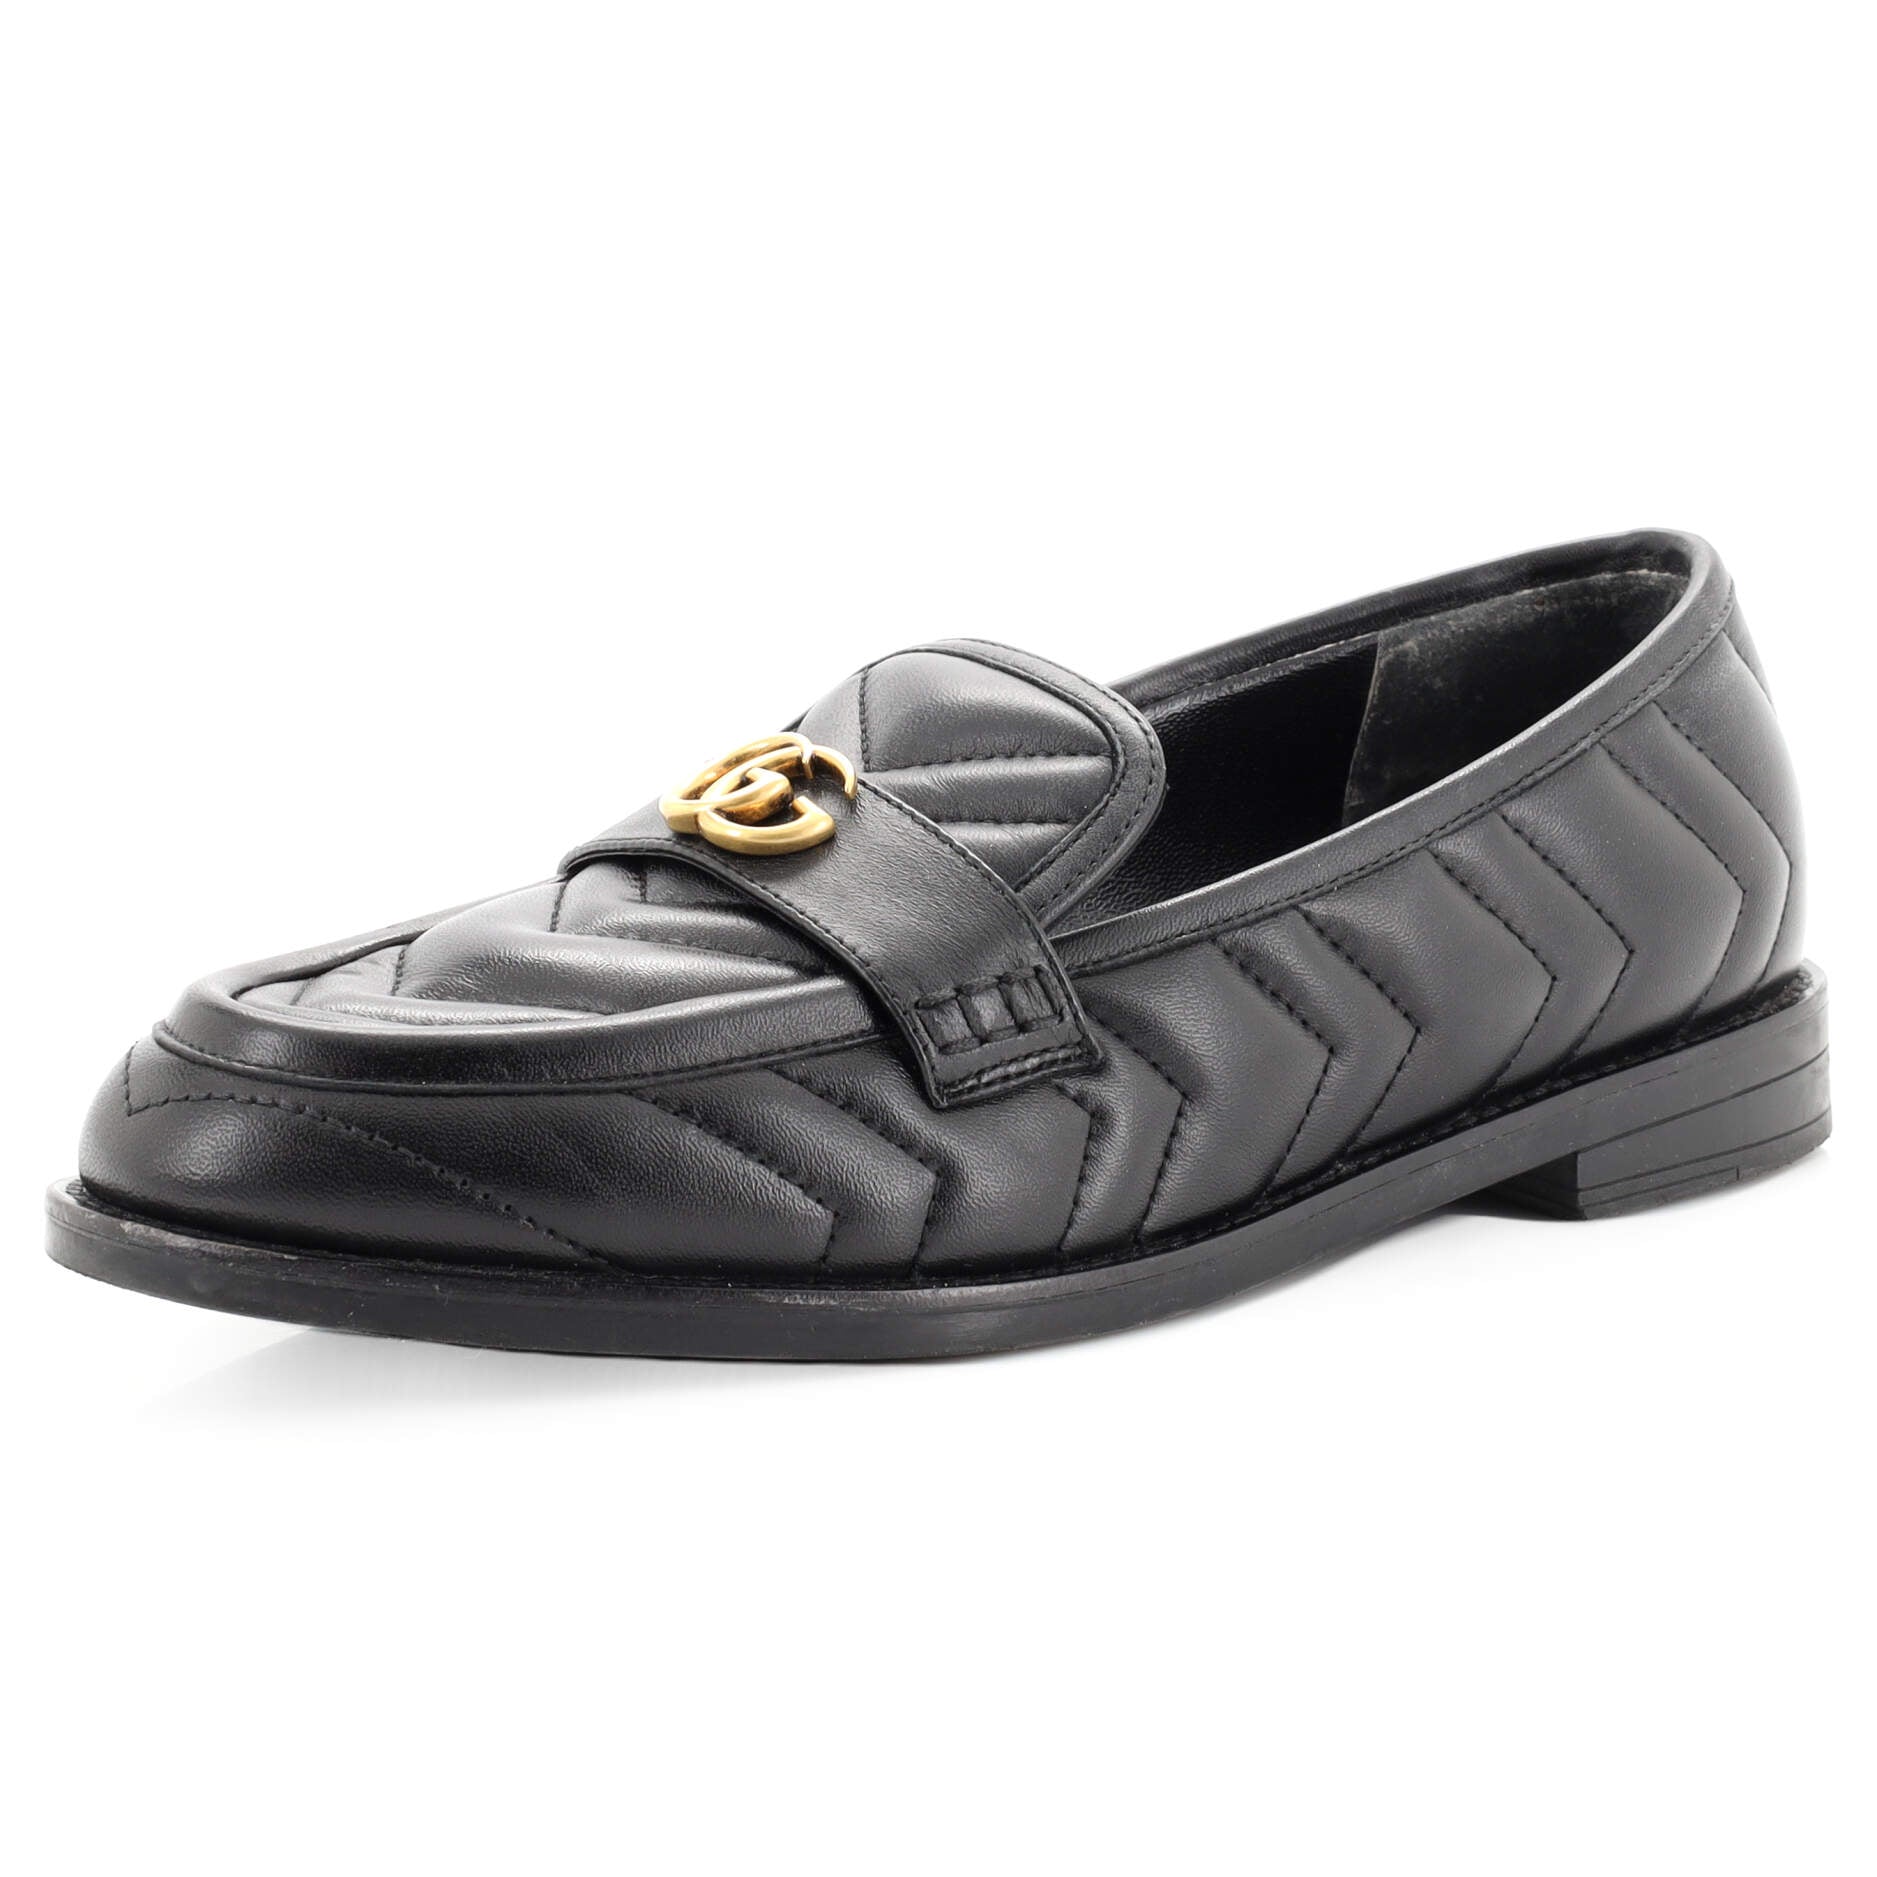 Gucci Women's GG Marmont Loafers Leather Neutral